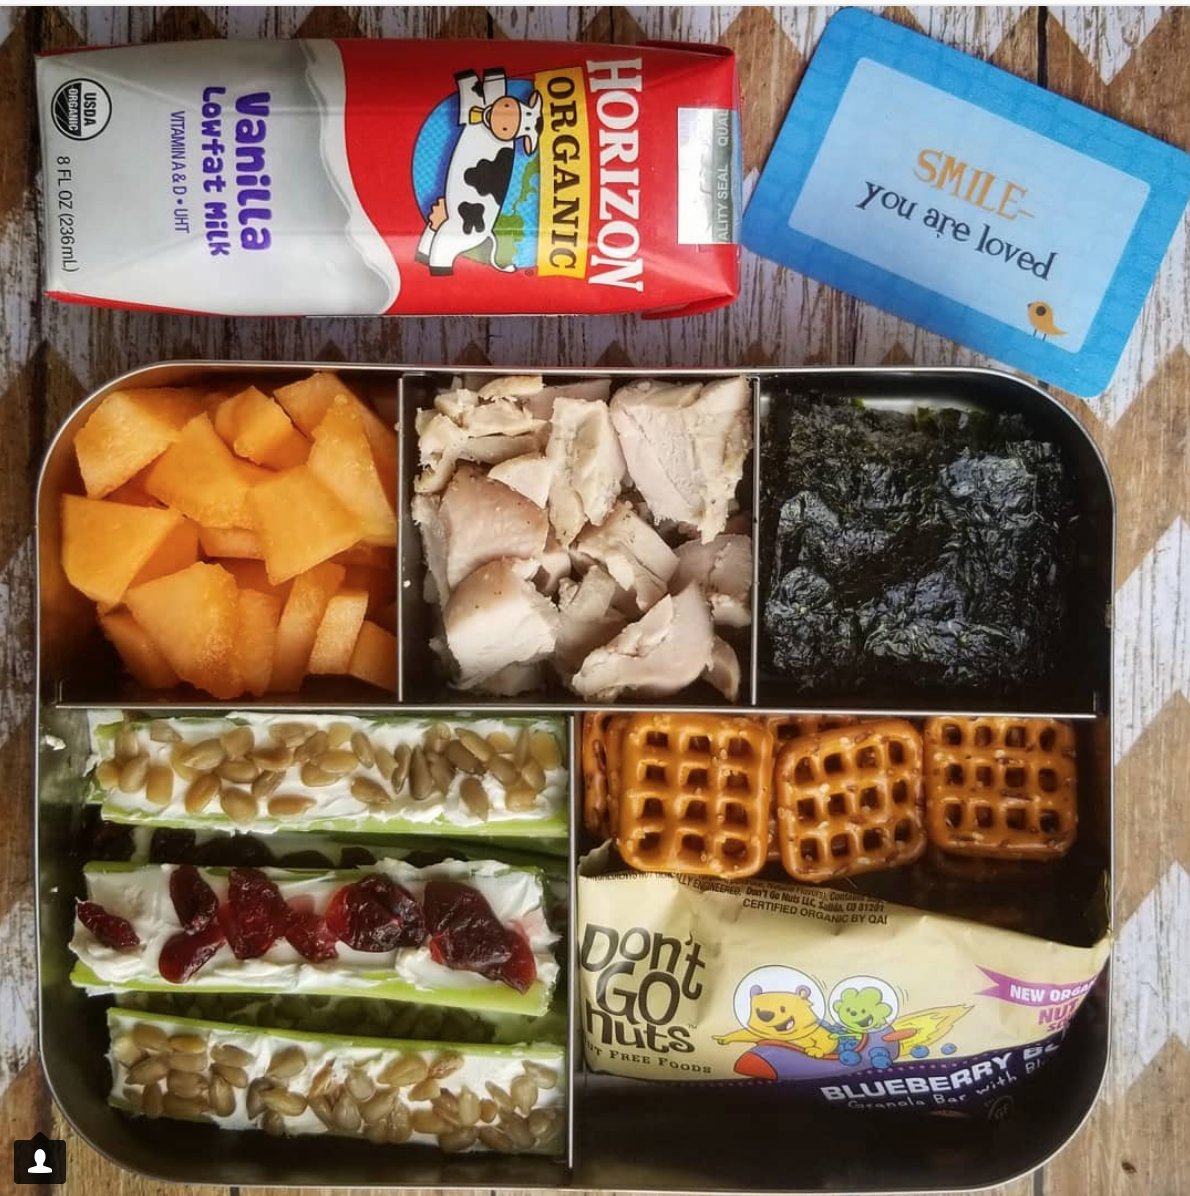 Cute little monkey dictated her lunch today. bit.ly/2P4NkWH   Thank you Monkey for choosing #Seasnax! #5thgrade #schoollunch #kidsbento #kidslunch #organic #nutfree #lunchideas #produceforkids #lunchbots #healthykidsfood #lunchbotscinco #monkeymunchables #lovesprouts